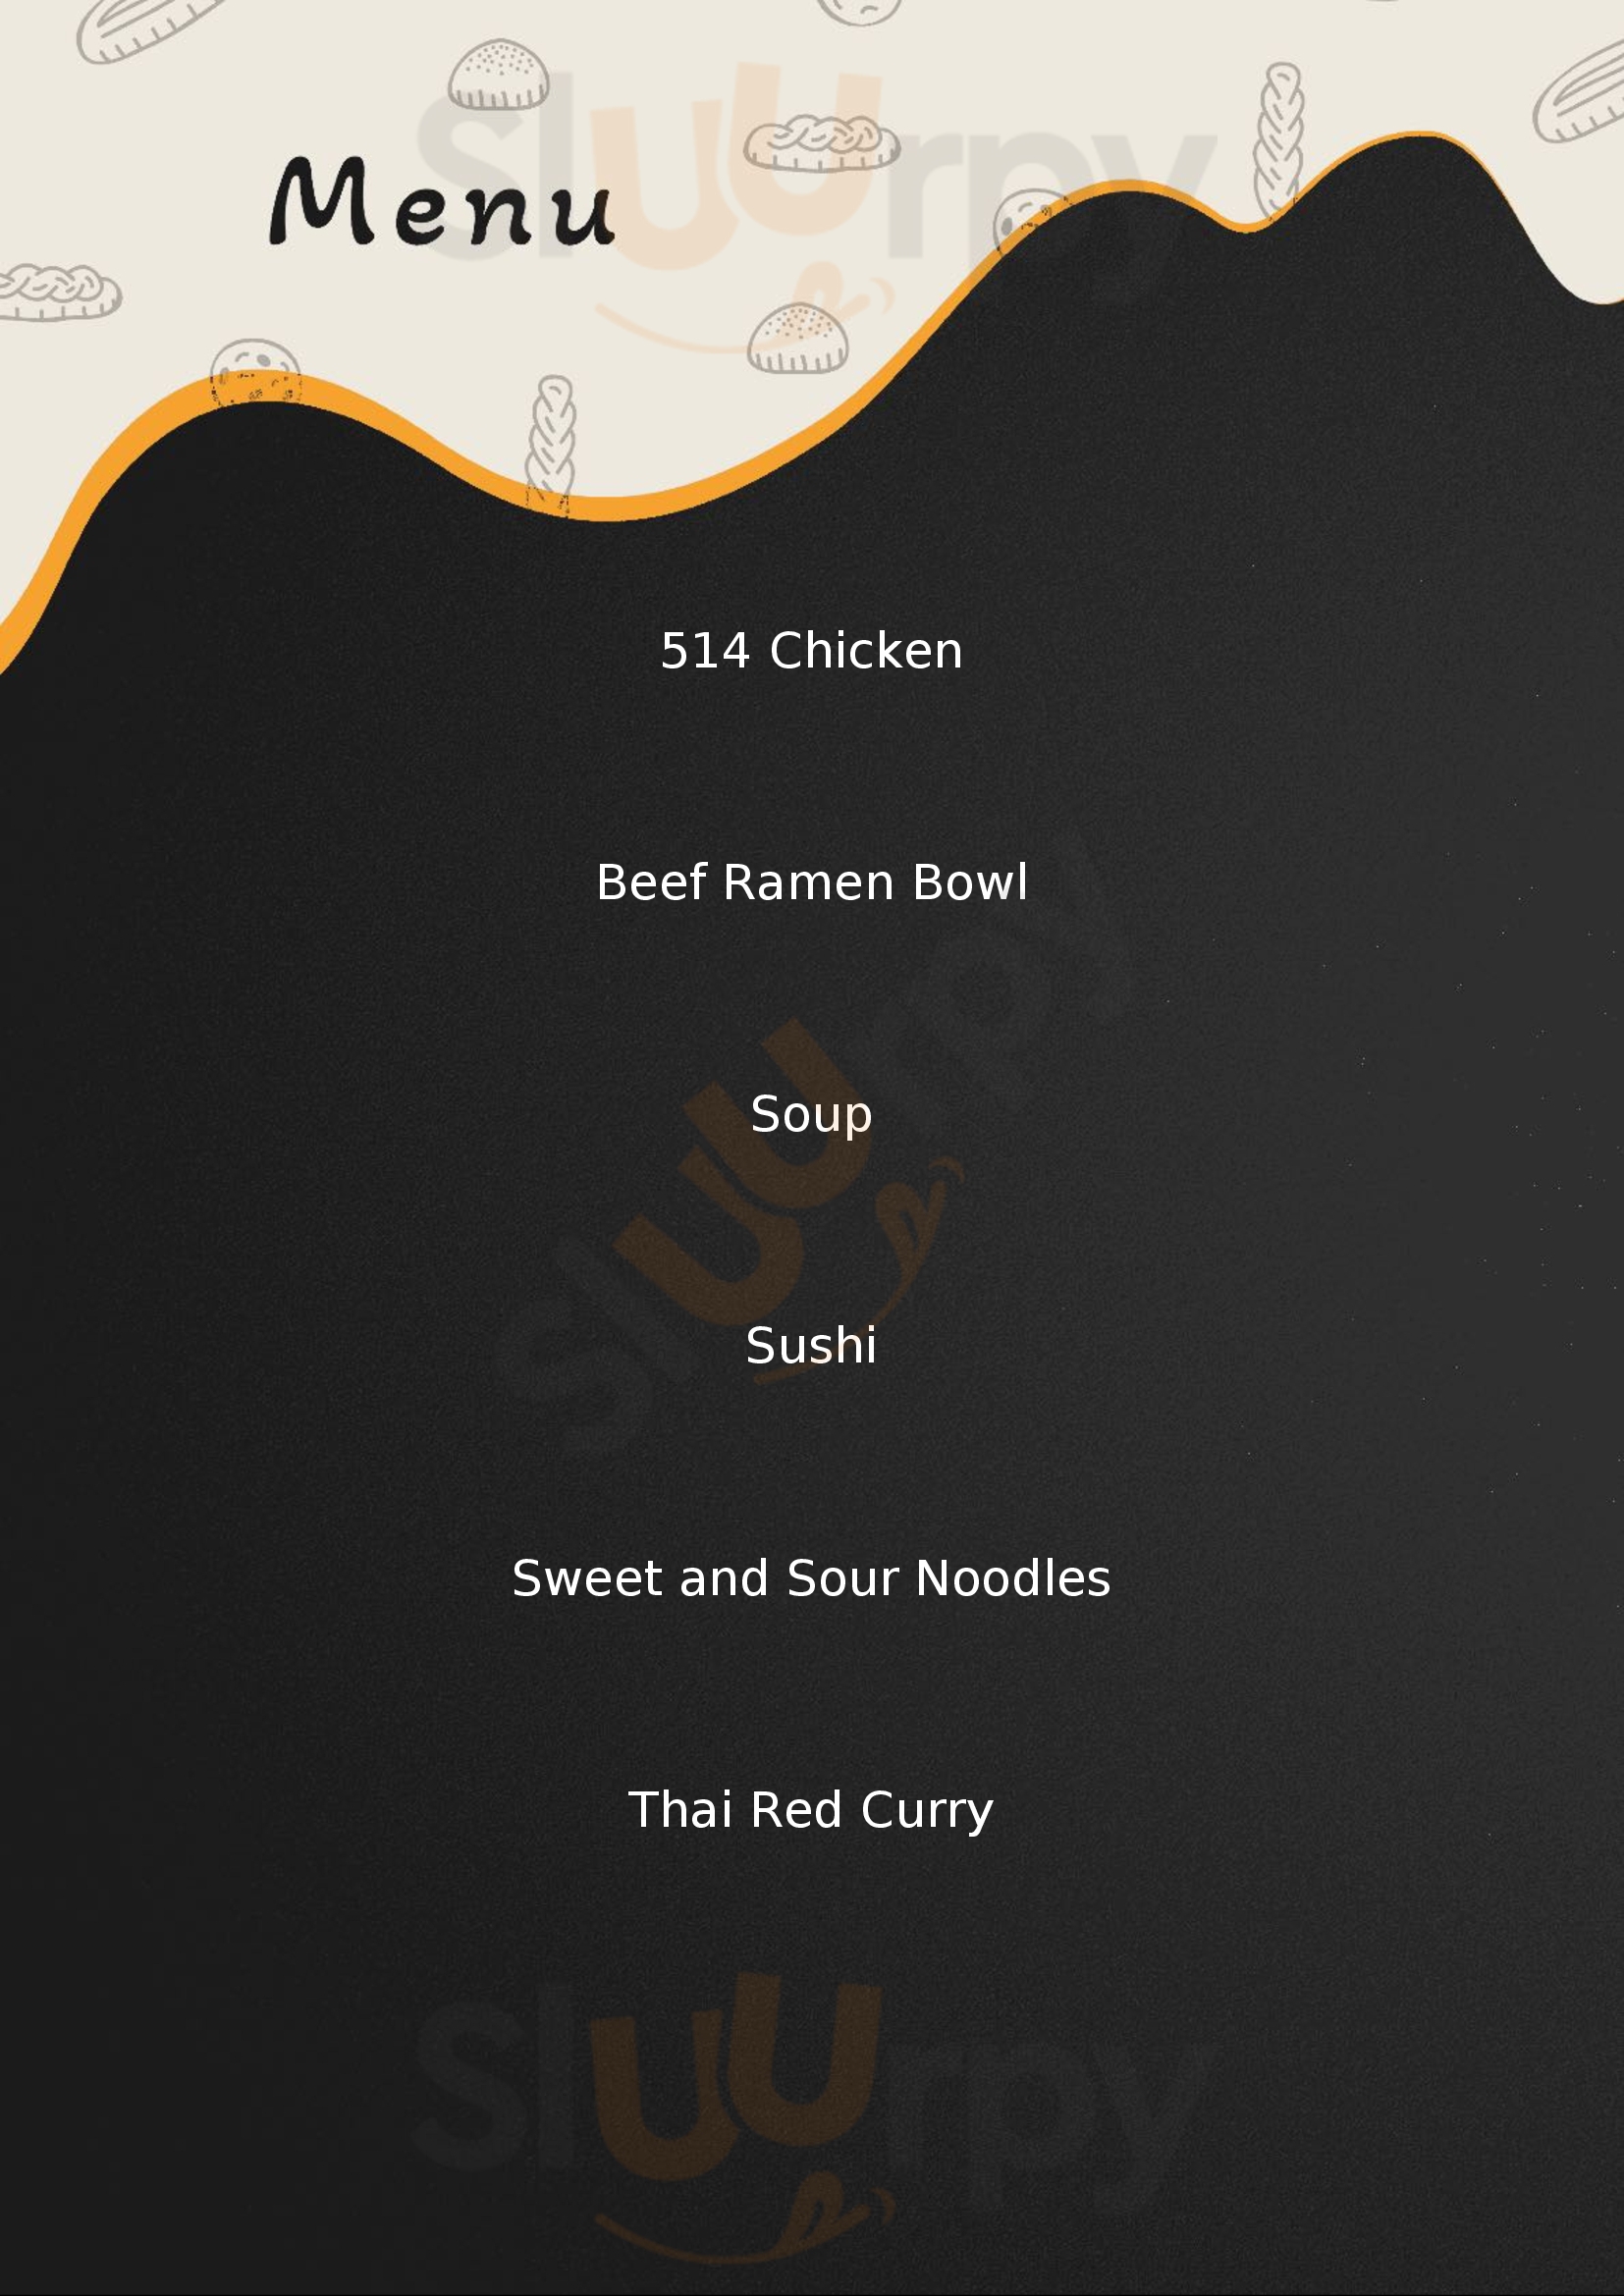 Simply Asia Mall Of Africa Midrand Menu - 1